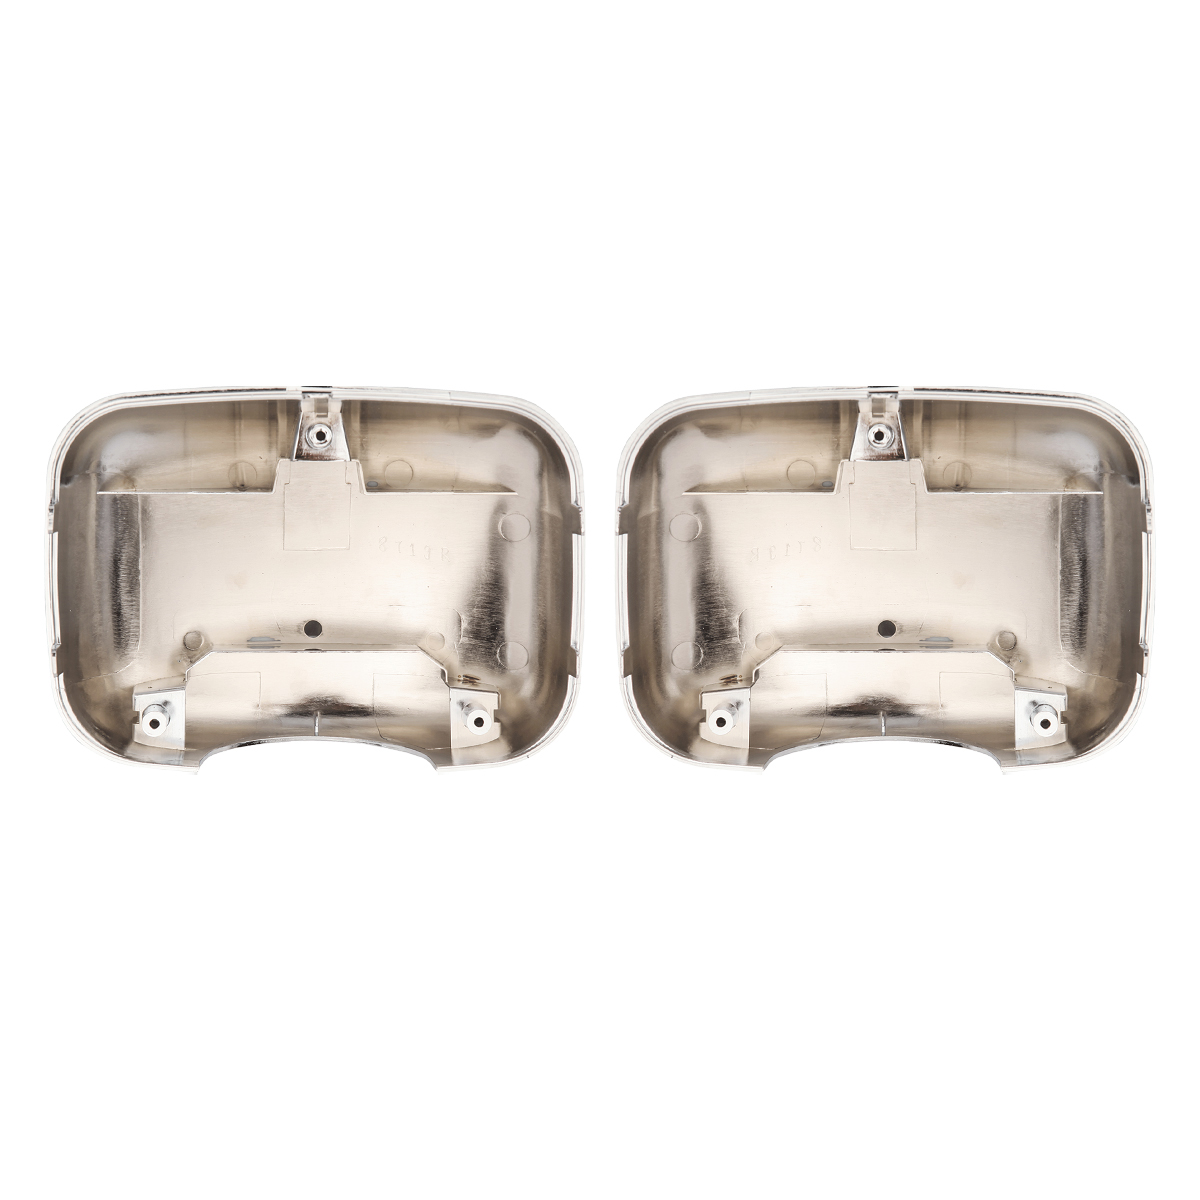 Chrome Hood Mirror Cover for American Truck Freightliner Cascadia 